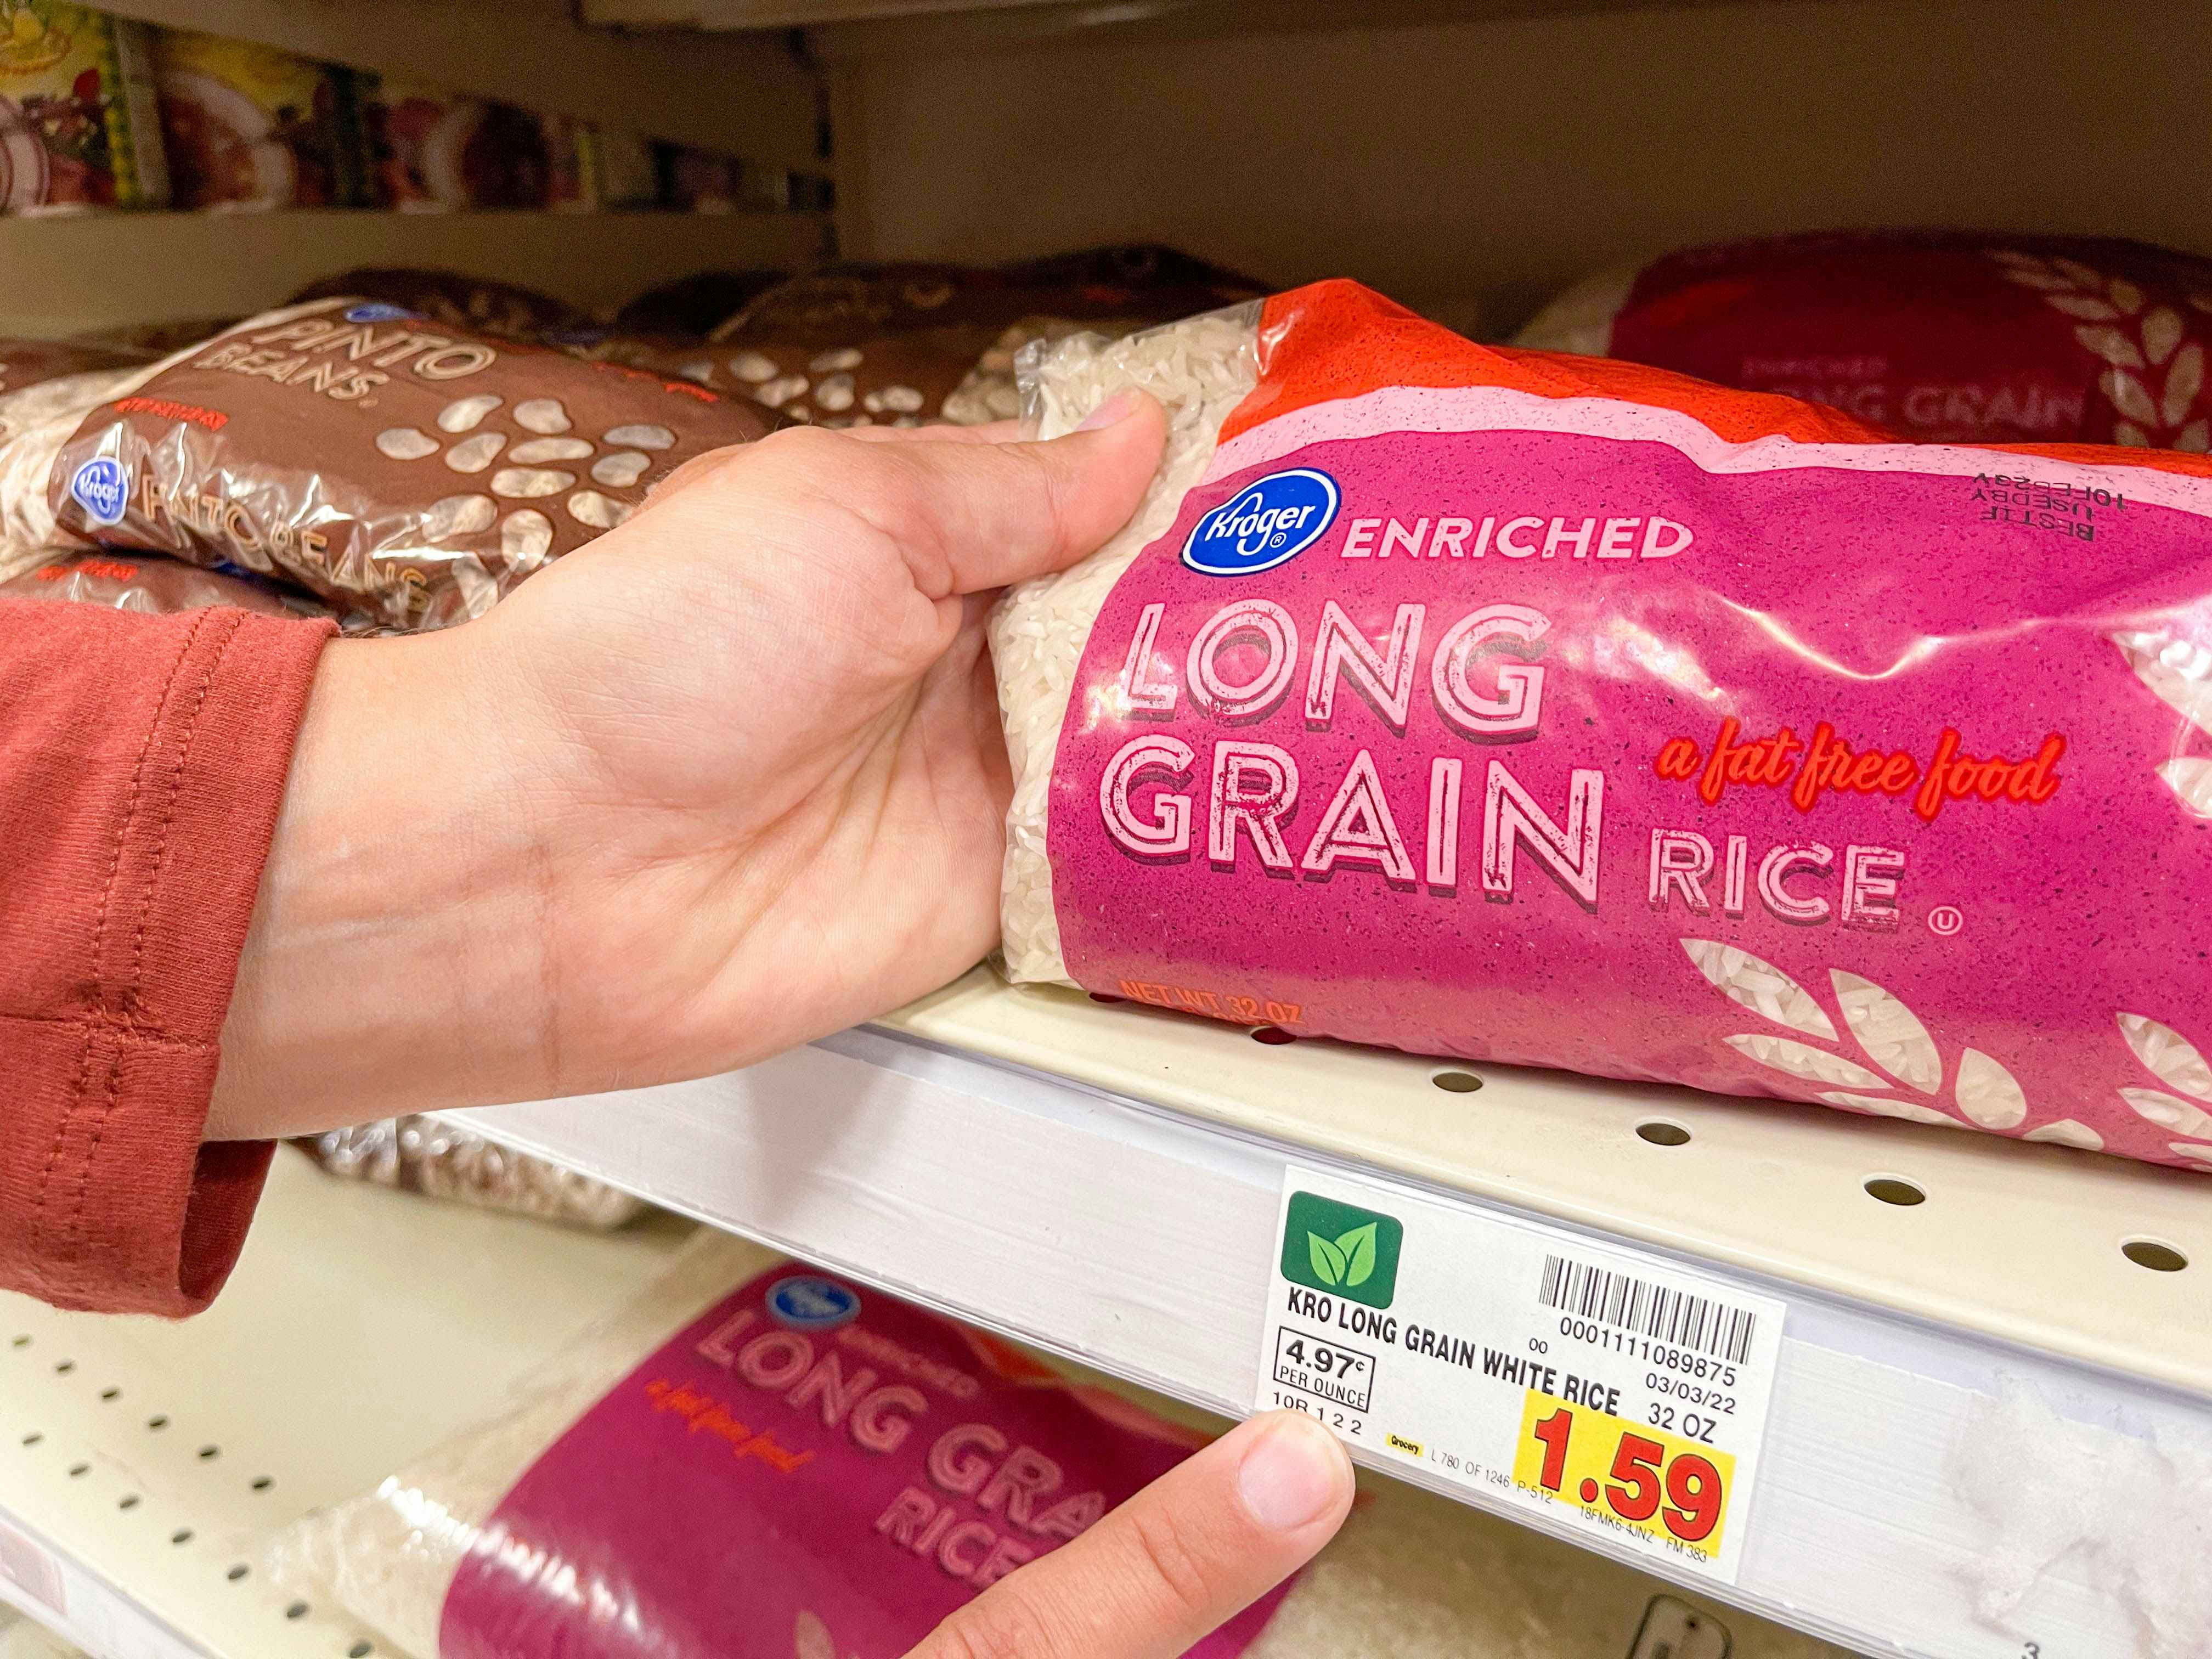 A person's hands, one holding up one end of a bag of Kroger enriched long grain rice sitting on a shelf, and the other hand pointing at the price tag for the displayed product.